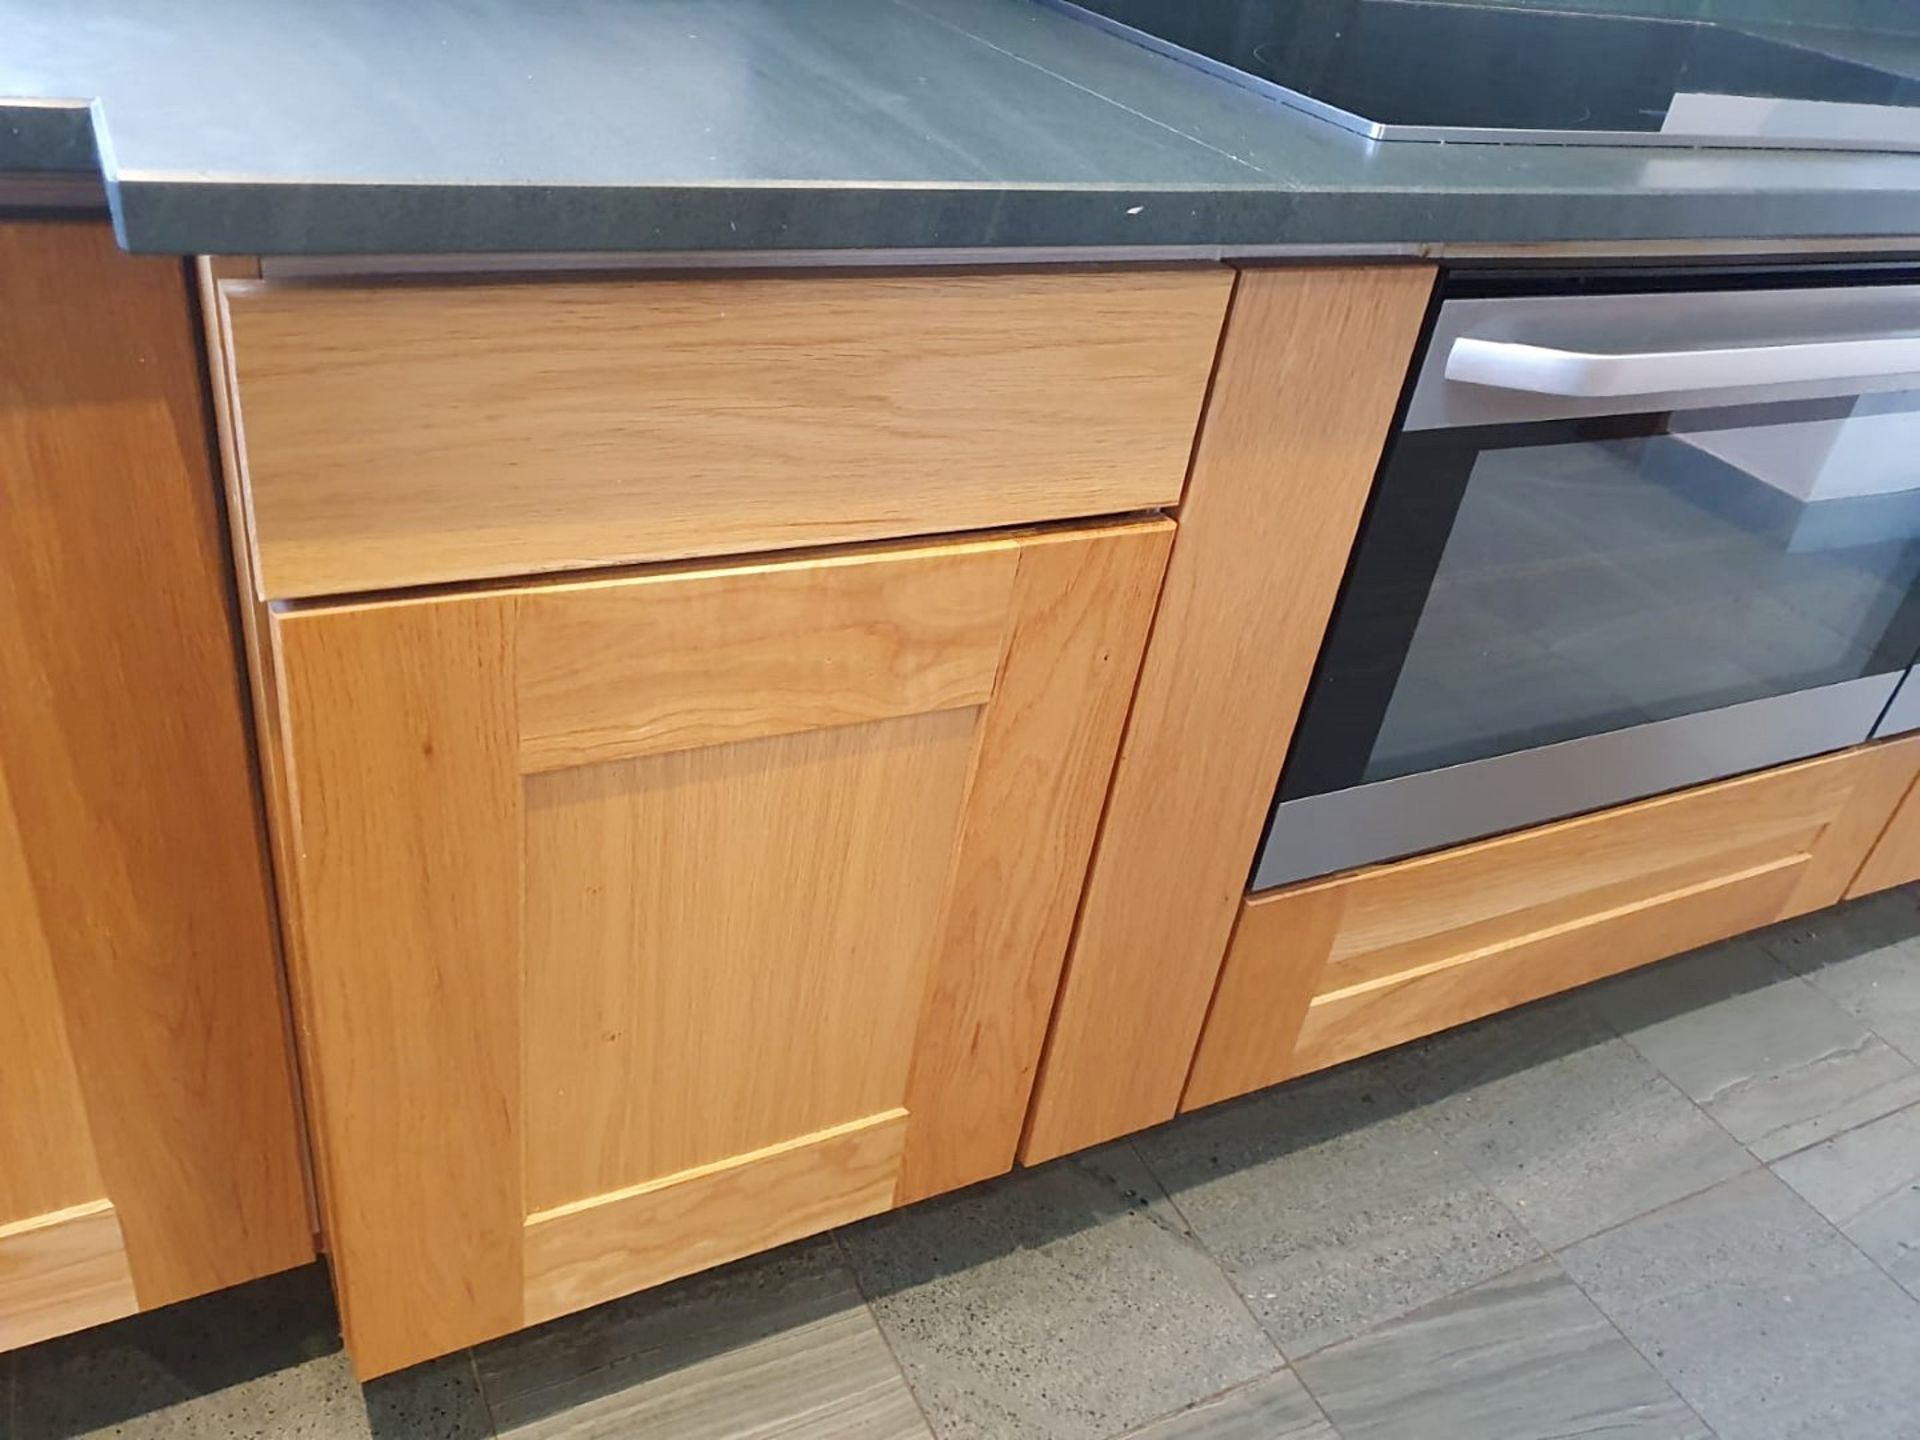 1 x Solid Oak Fitted Kitchen With Integrated Miele Appliances - CL487 - Location: Wigan *NO VAT* - Image 37 of 82